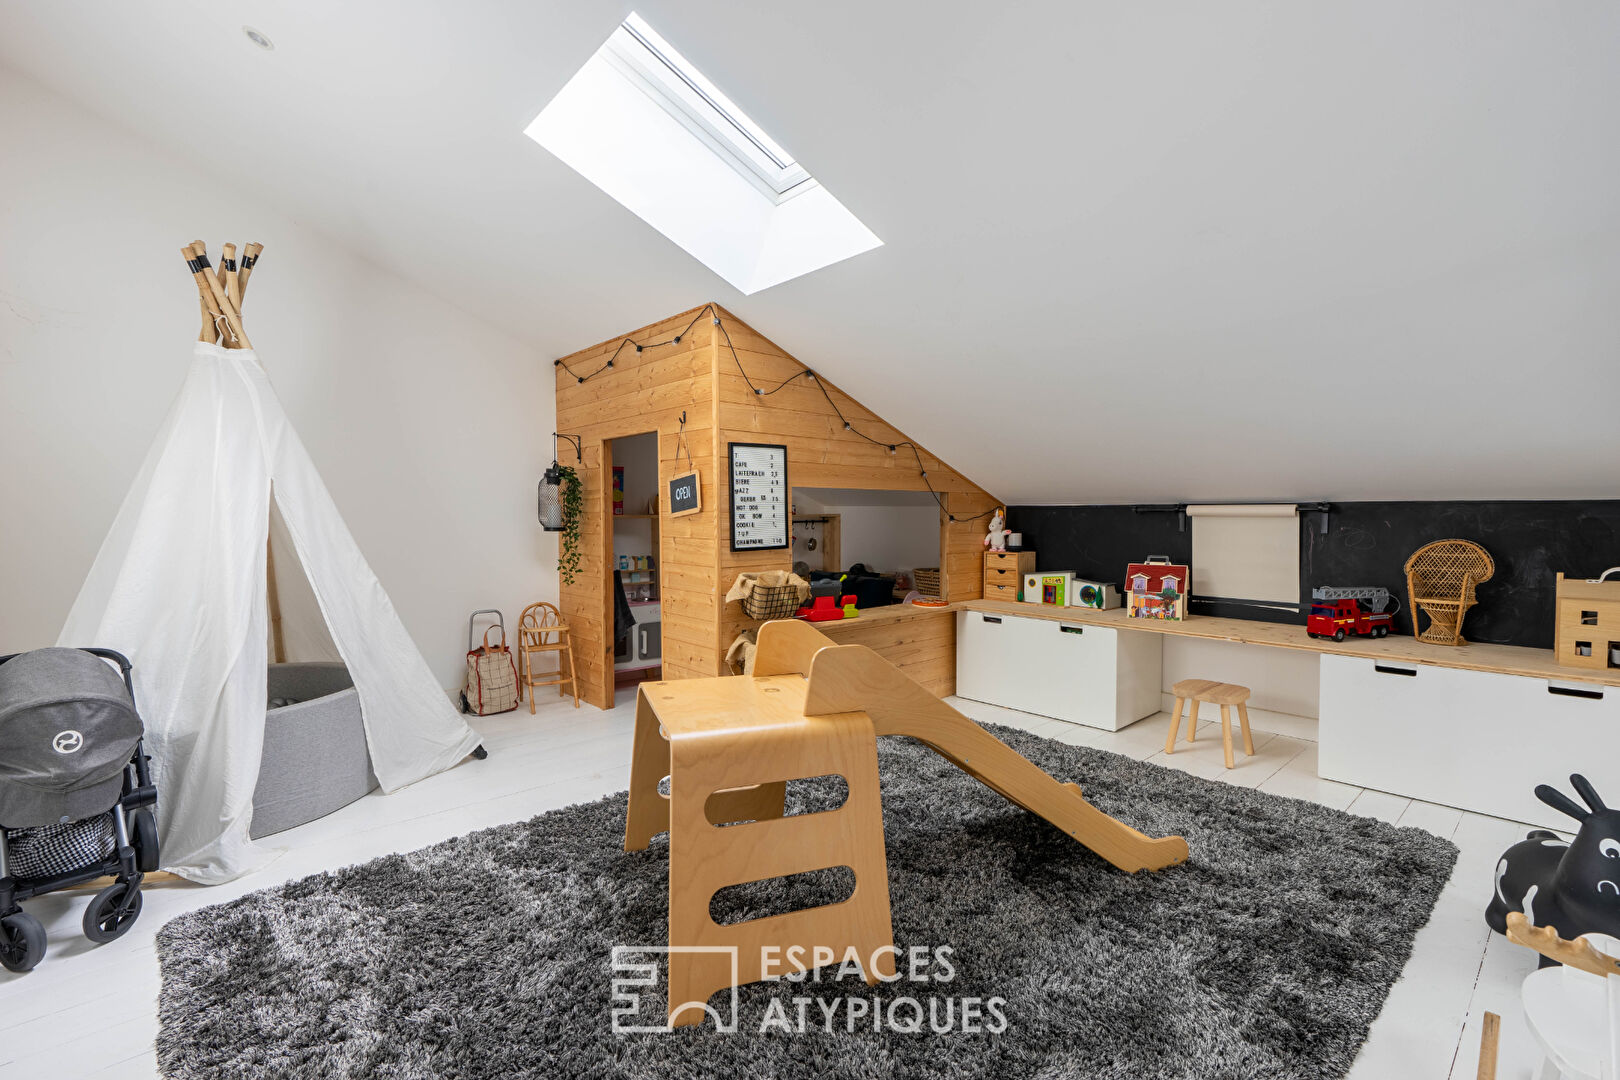 Design and ecological loft in an old carpentry